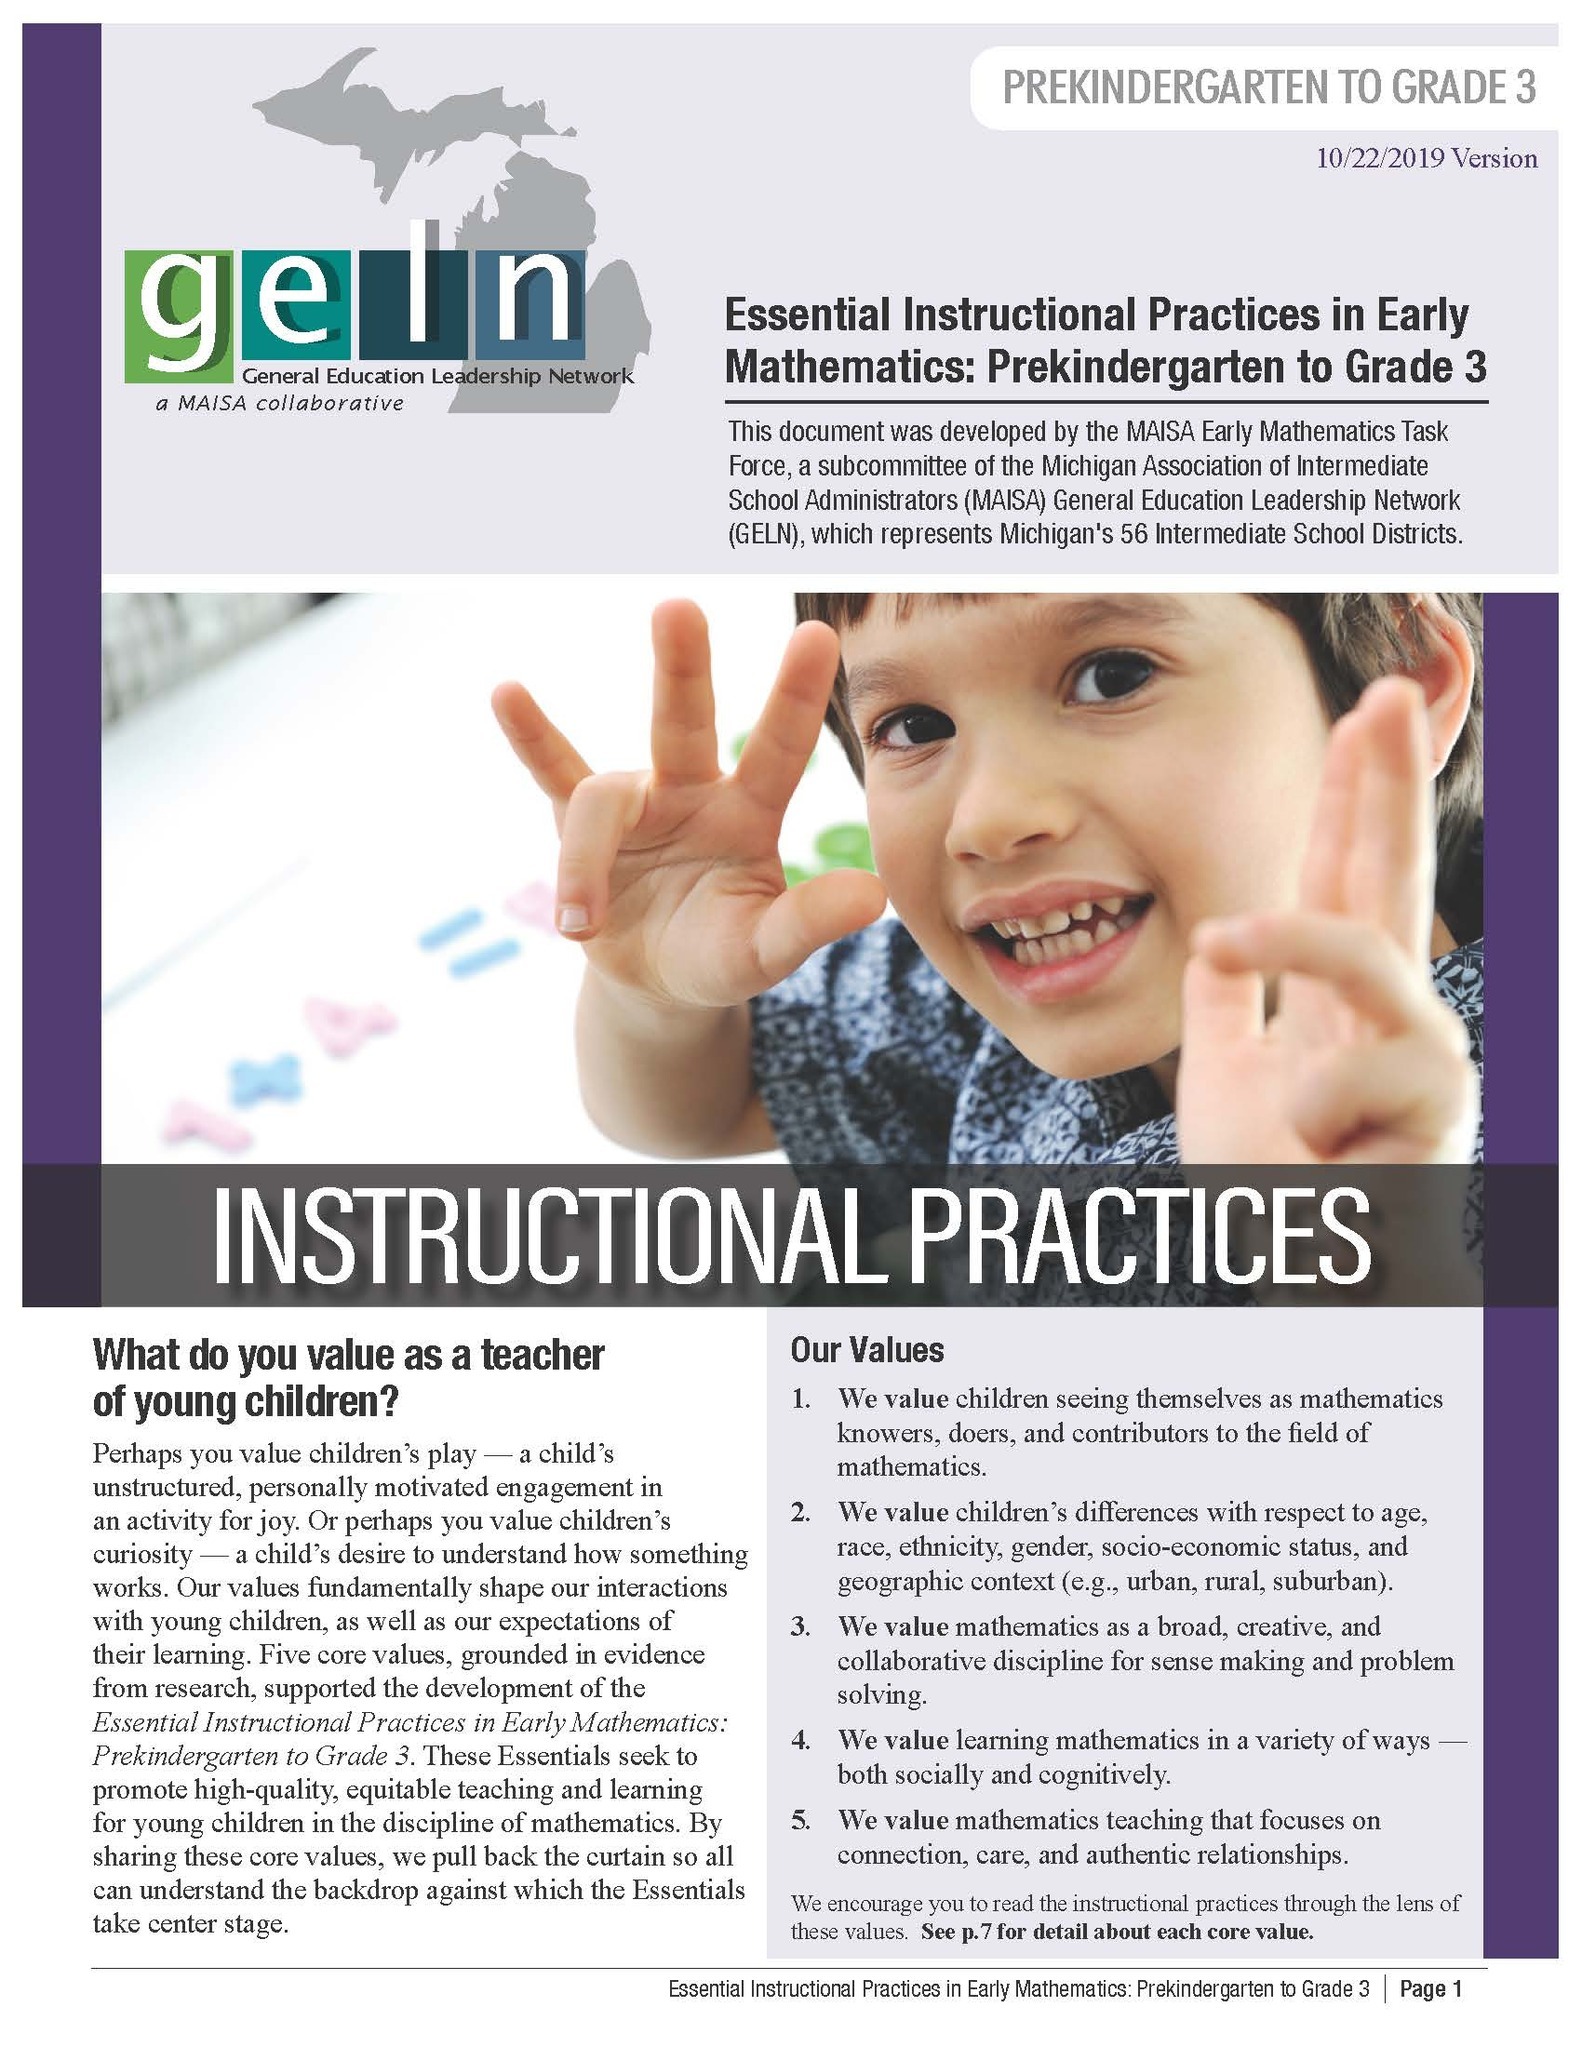 Early Math Pre-K - 3 Document